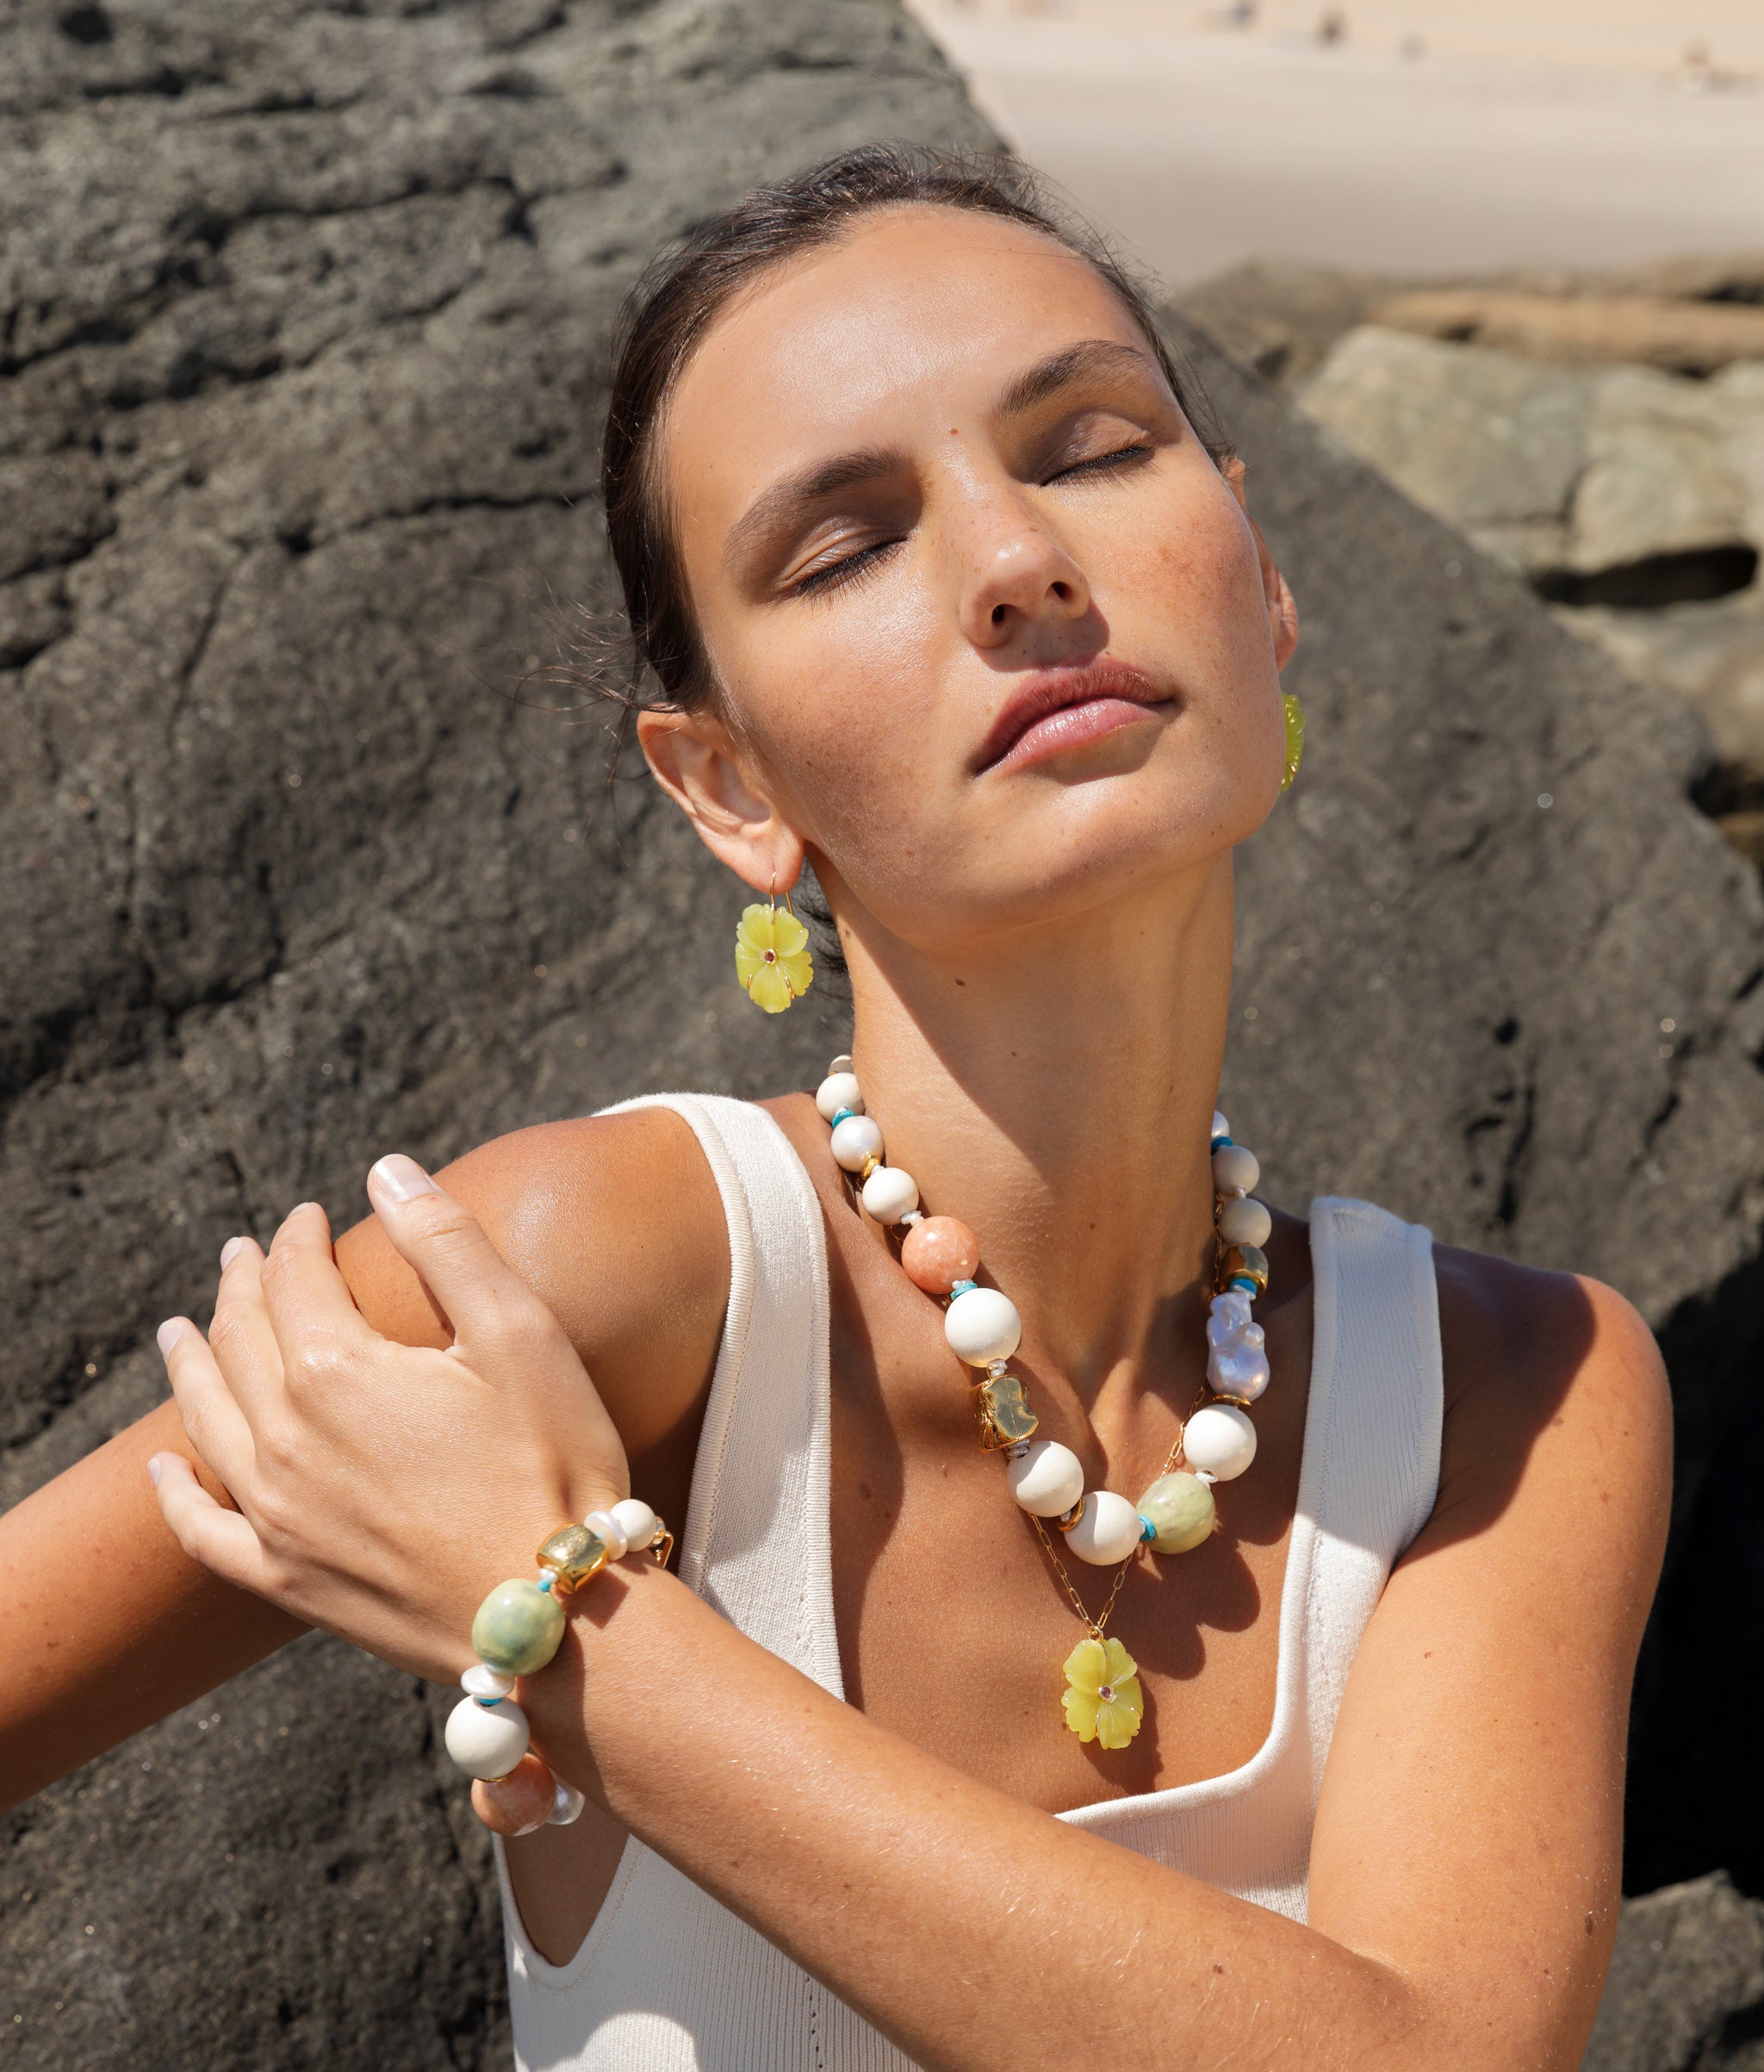 Another angle of model wearing Andros Bracelet and Necklace, paired with yellow-green floral necklace and earrings.